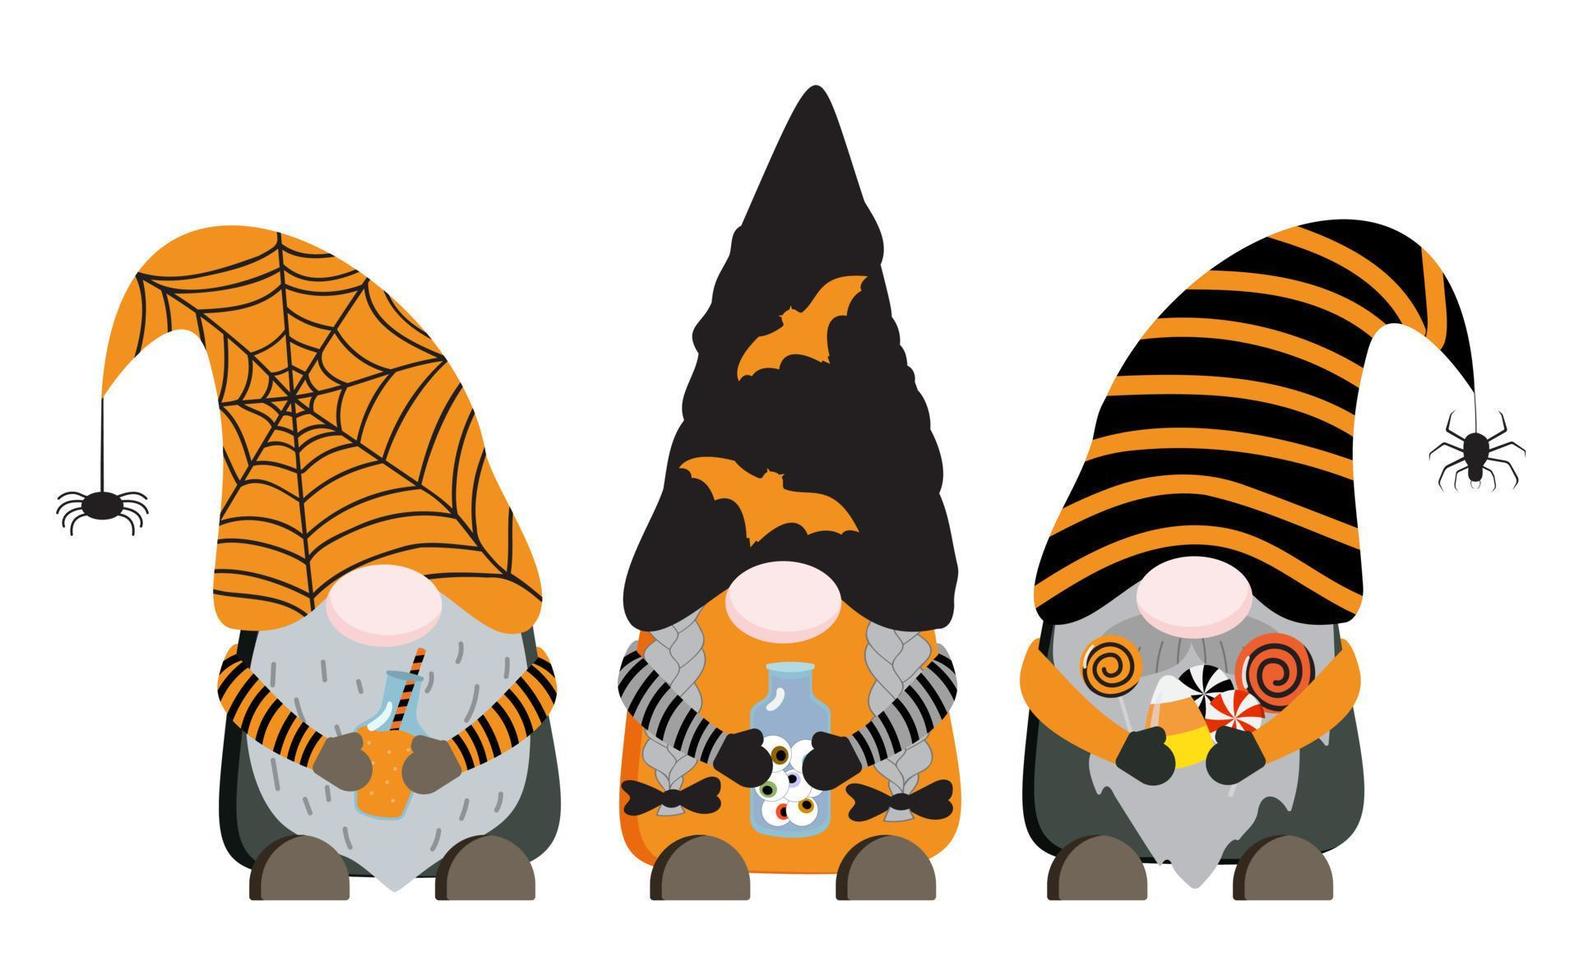 Cartoon Halloween vector gnomes in orange and black colors with potion, bottle with eyes, sweets. Isolated on white background.